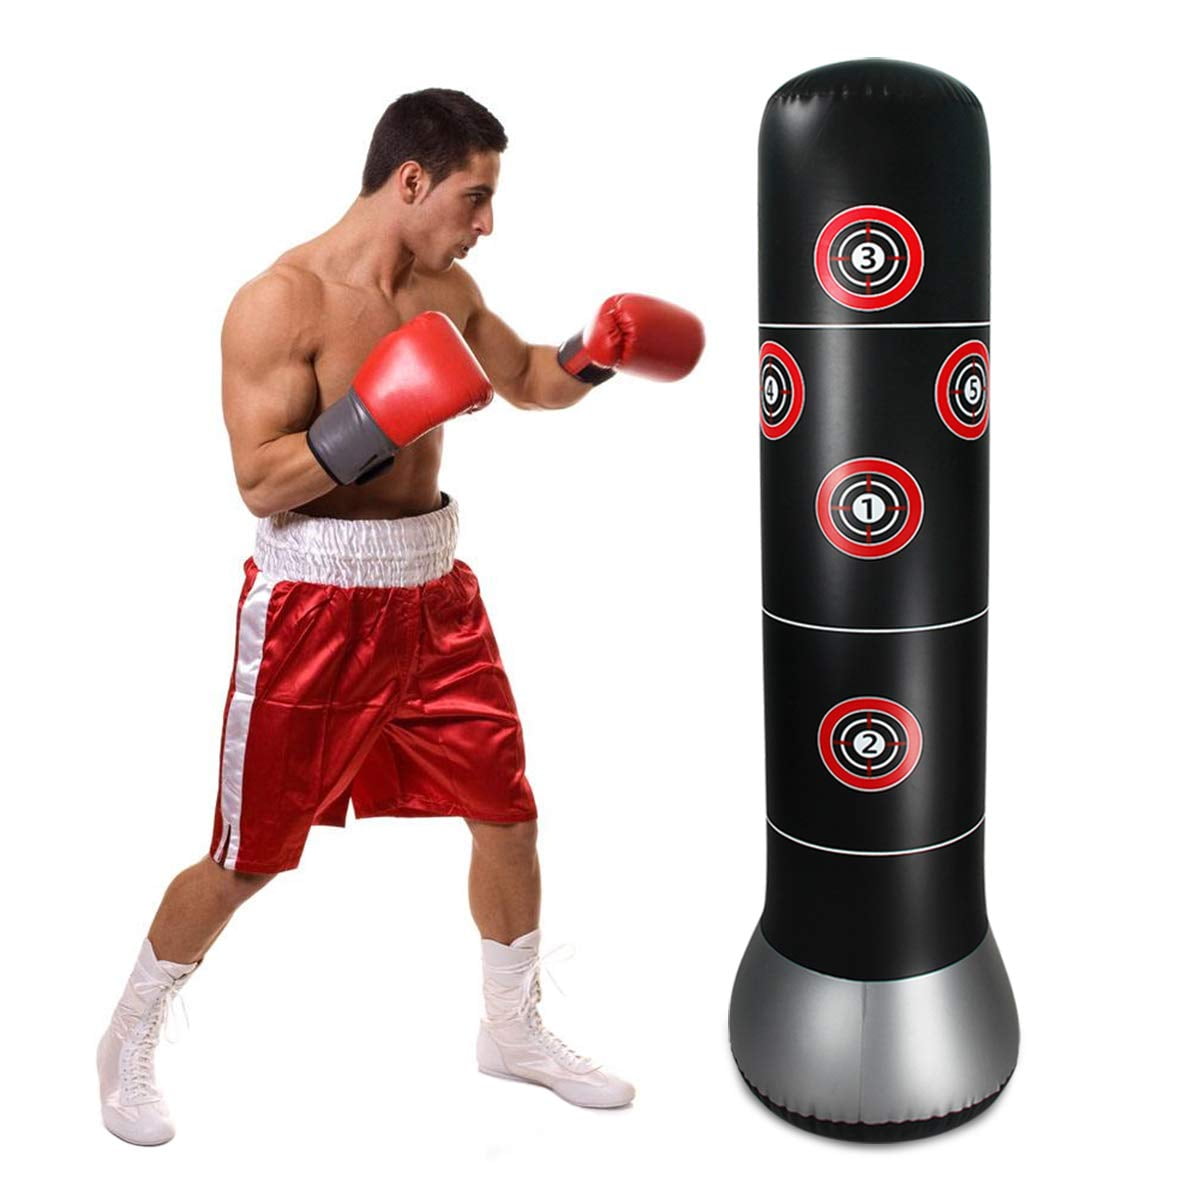 160cm Free Standing Inflatable Boxing Punch Bag Kick MMA Training Kids Adults US 